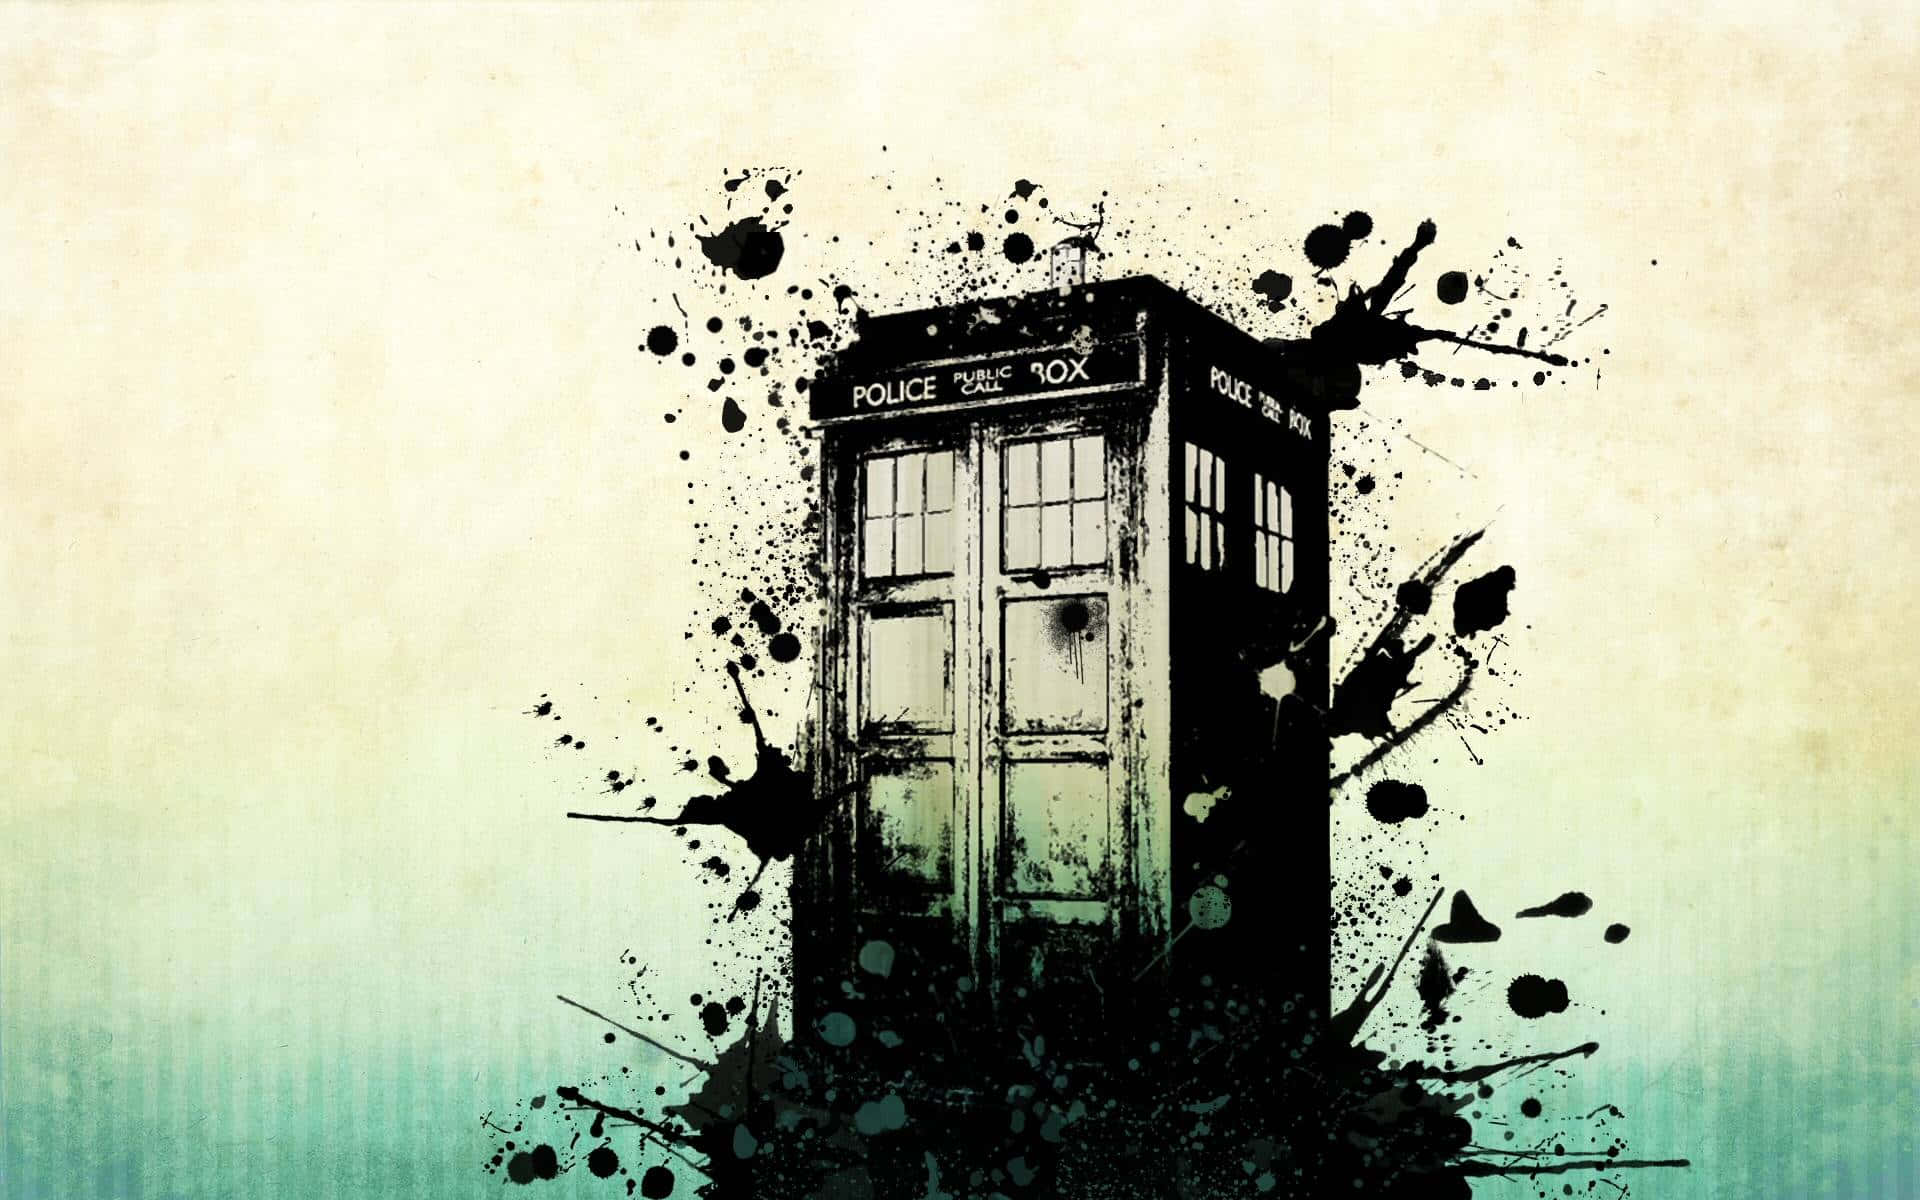 Journey through time and space with the iconic TARDIS Wallpaper